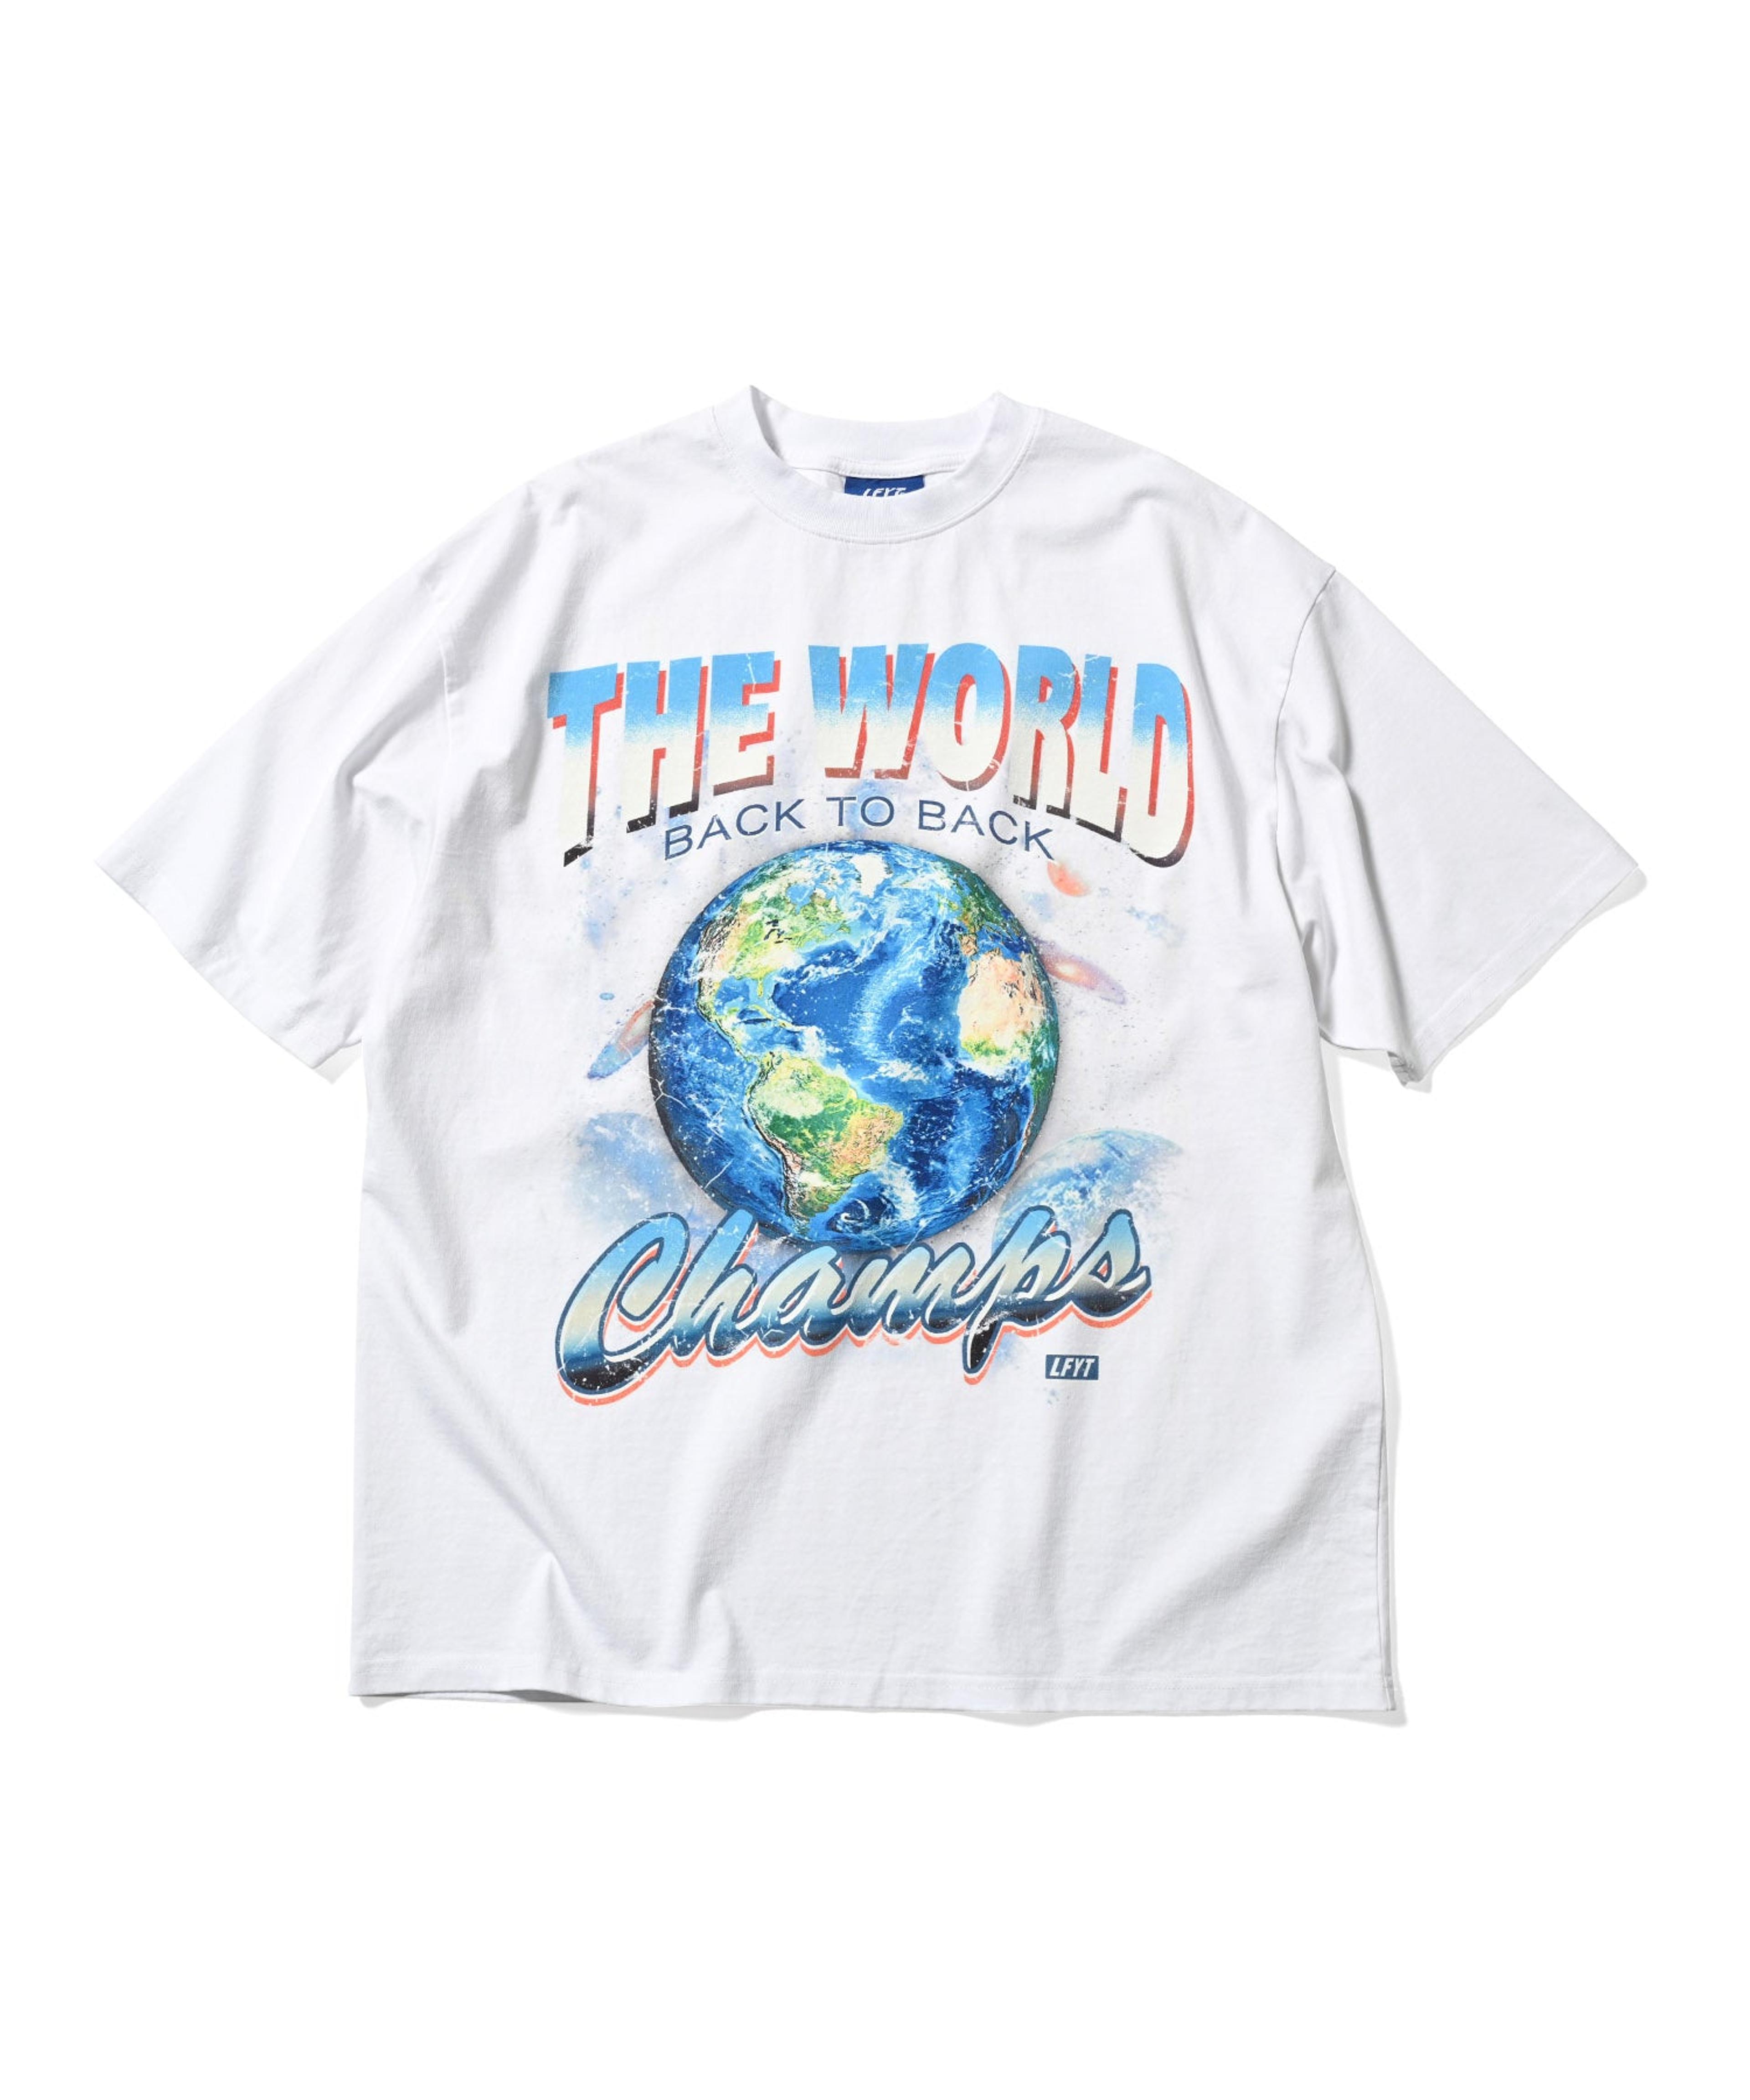 Alternate View 3 of LFYT - WORLD CHAMPS TEE TYPE-9 - VINTAGE EDITION LS240112